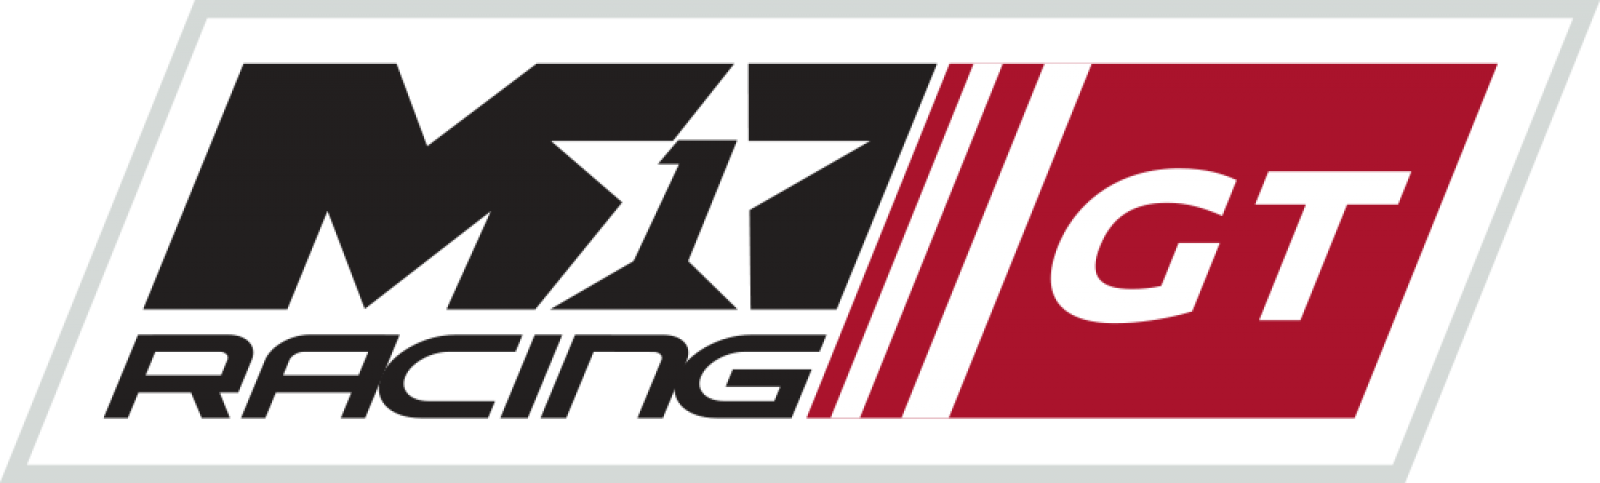 M1 GT Racing, first North American based team to register for Intercontinental GT Challenge